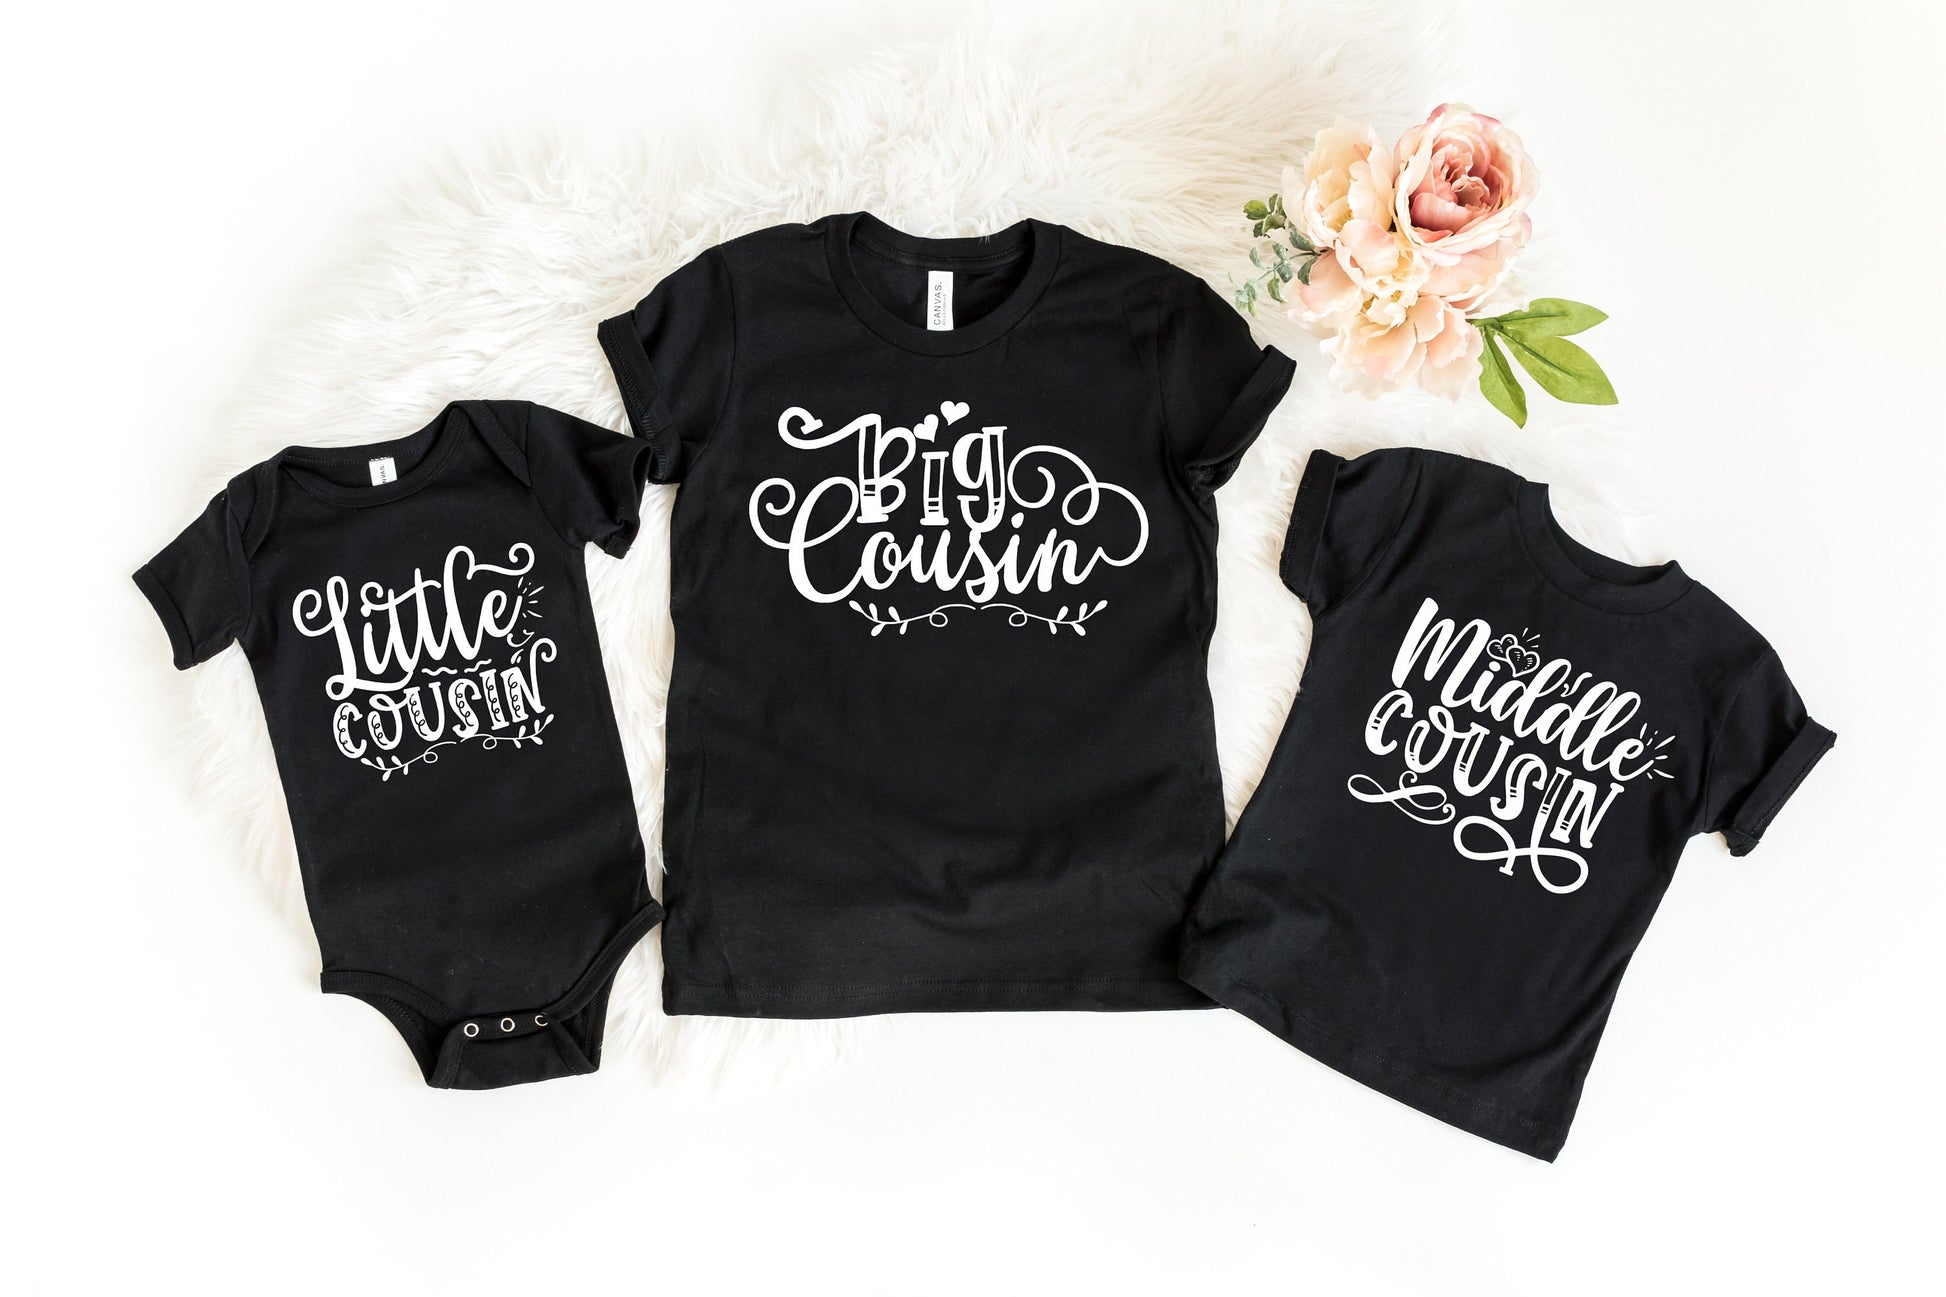 Big Cousin, Middle Cousin, Little Cousin or Baby Cousin Matching t-shirts - matching cousins - little cousin shirt - cousin crew - cousins